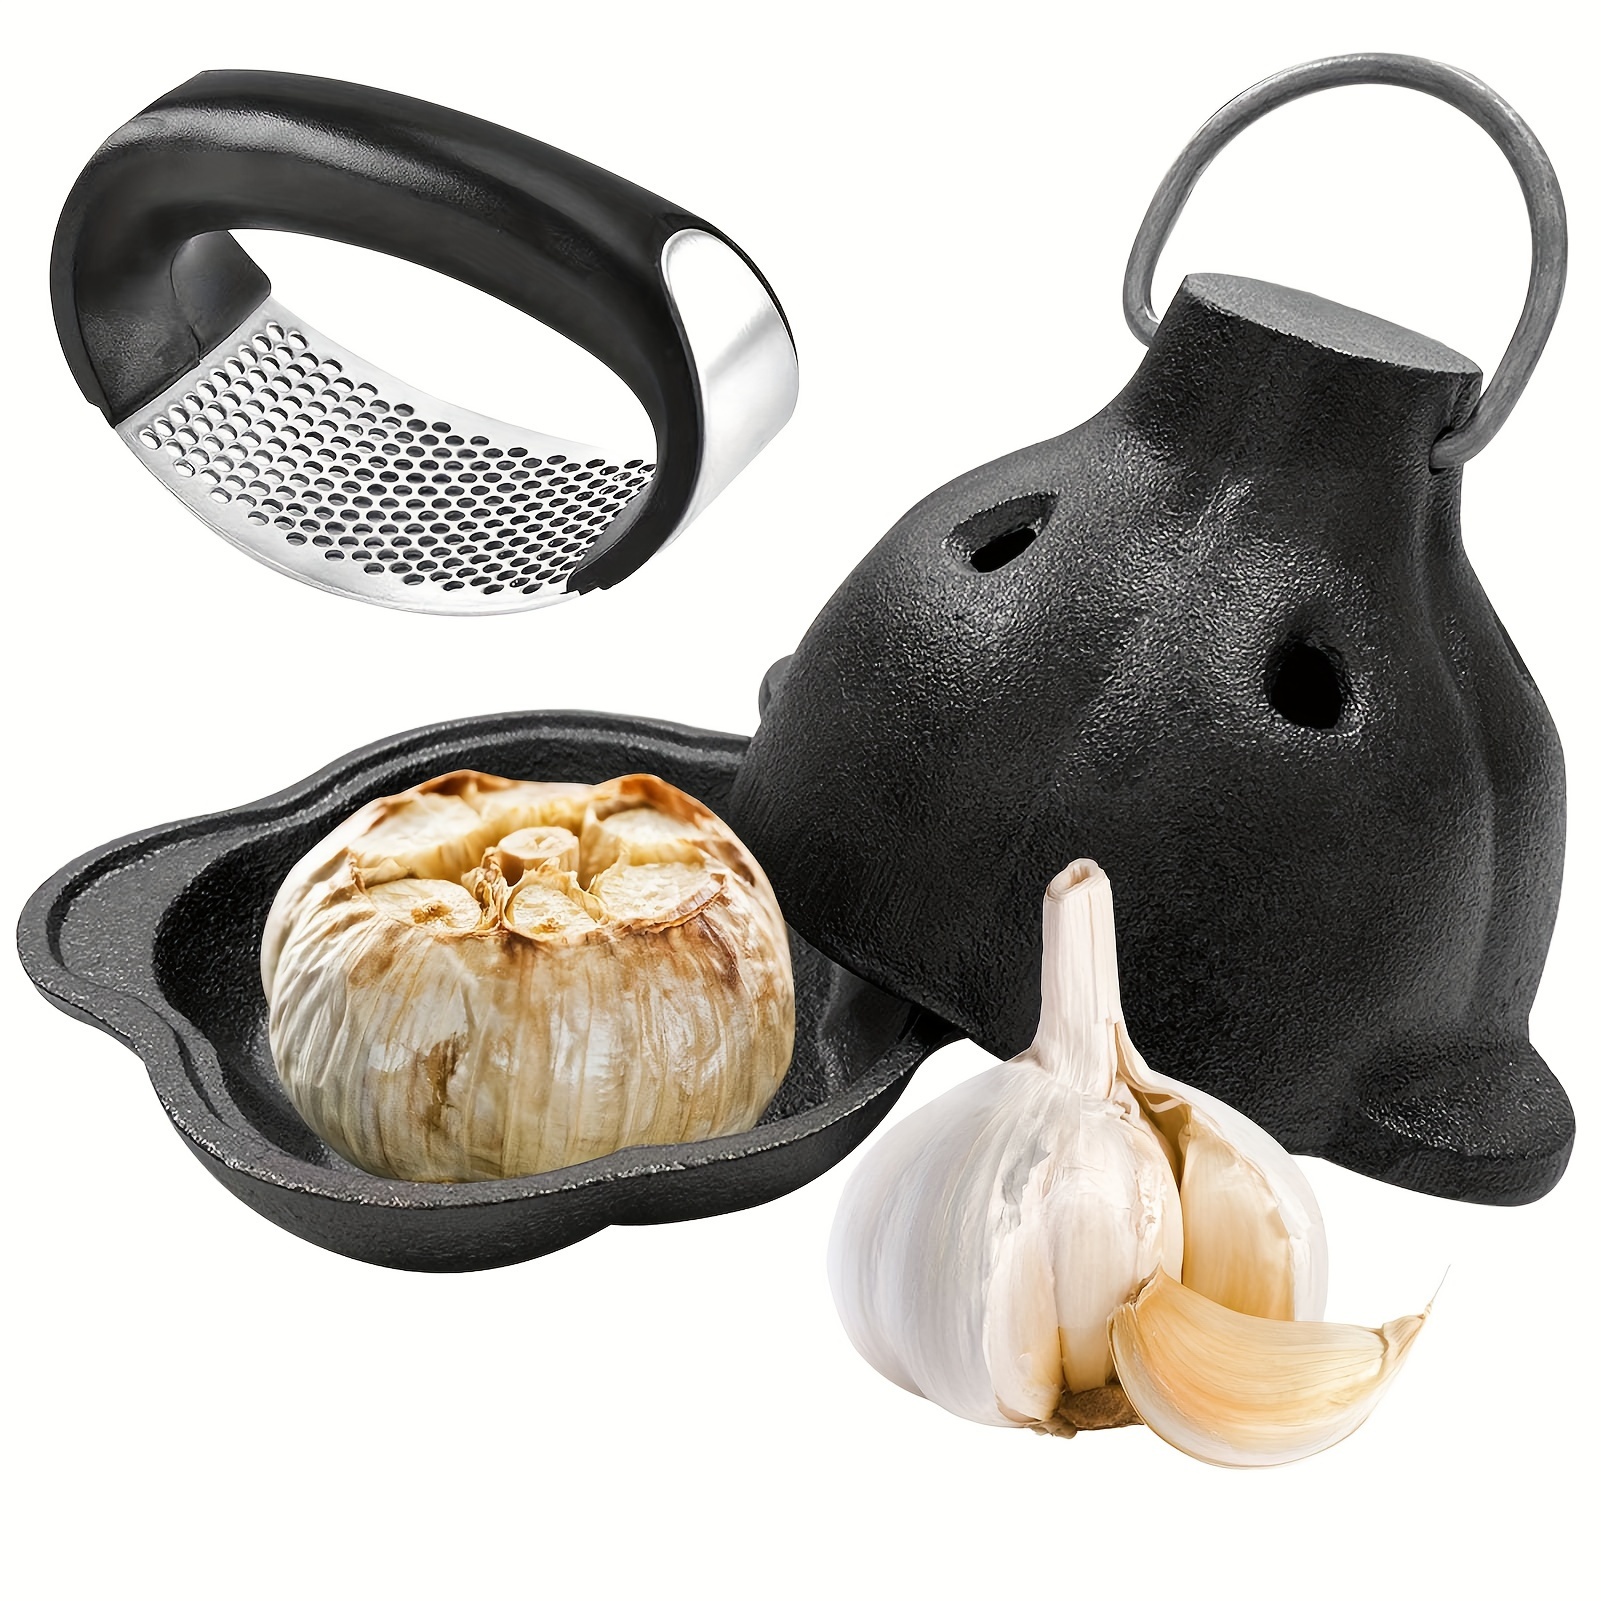  AOKDEER Garlic Roaster, Cast Iron Garlic Roaster for Kitchen  Grill Oven, Dining Room, Indoor or Outdoor, BBQ Grill Garlic Tools, Garlic  Baker for Picnic Camping Patio Backyard Cooking: Home & Kitchen